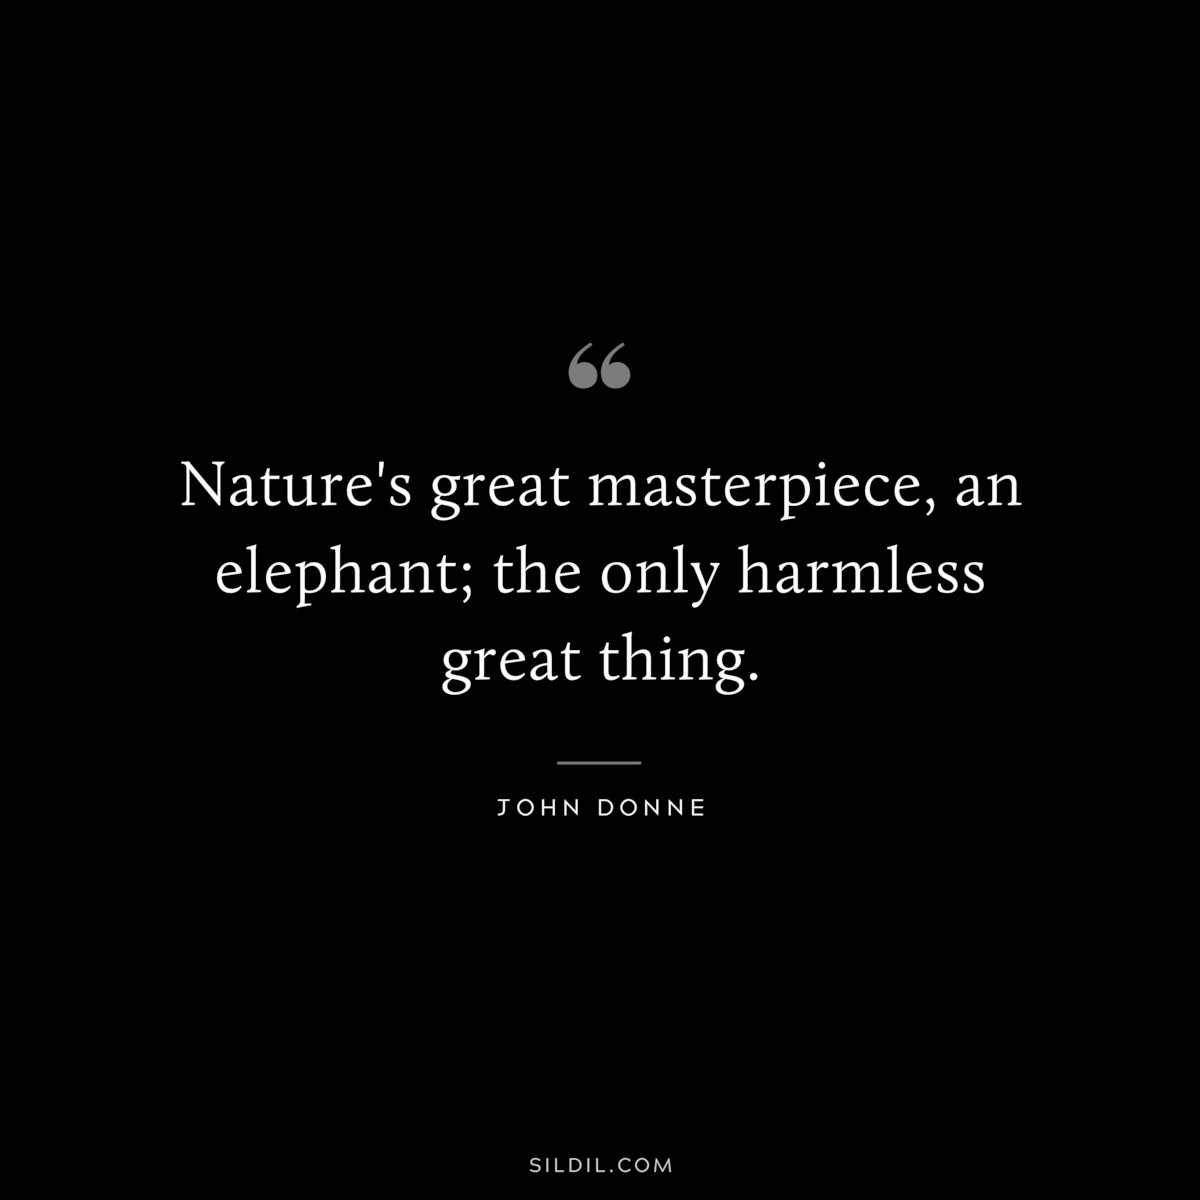 Nature's great masterpiece, an elephant; the only harmless great thing. ― John Donne